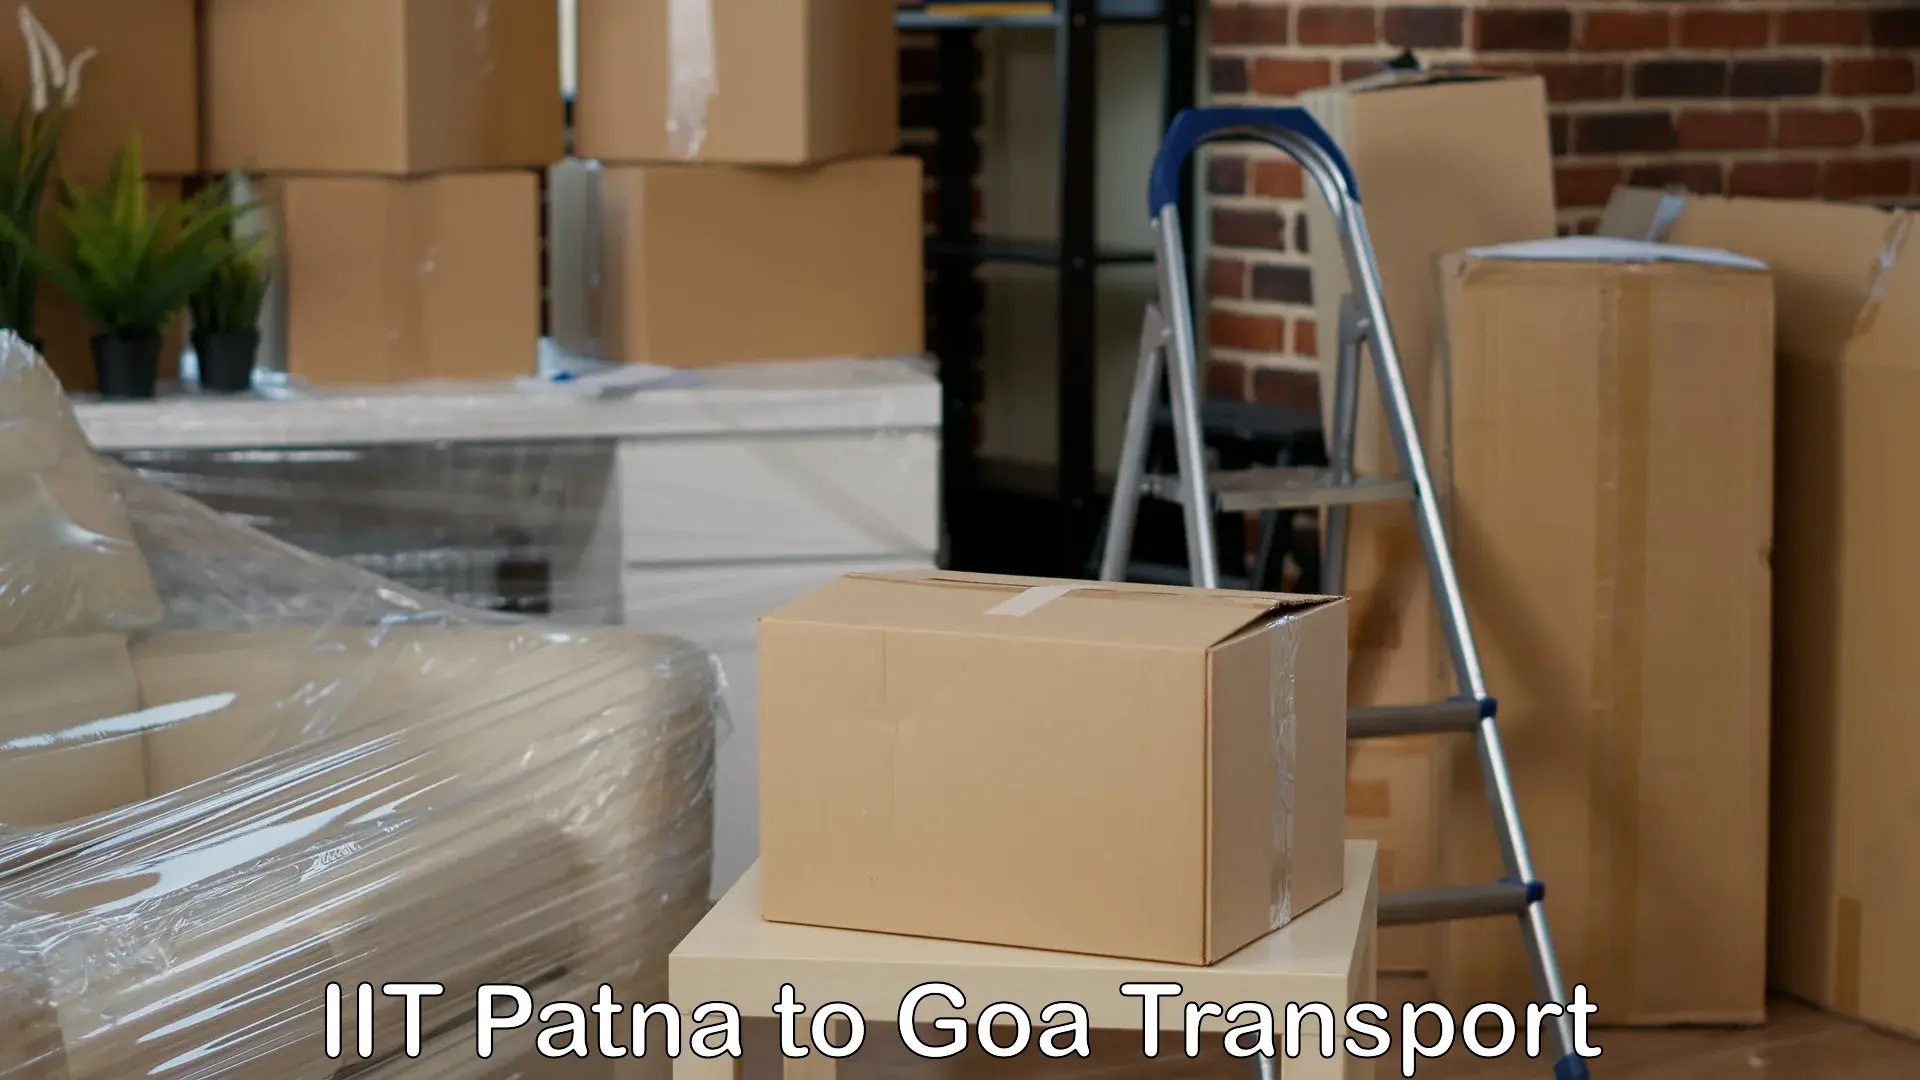 Container transportation services IIT Patna to Goa